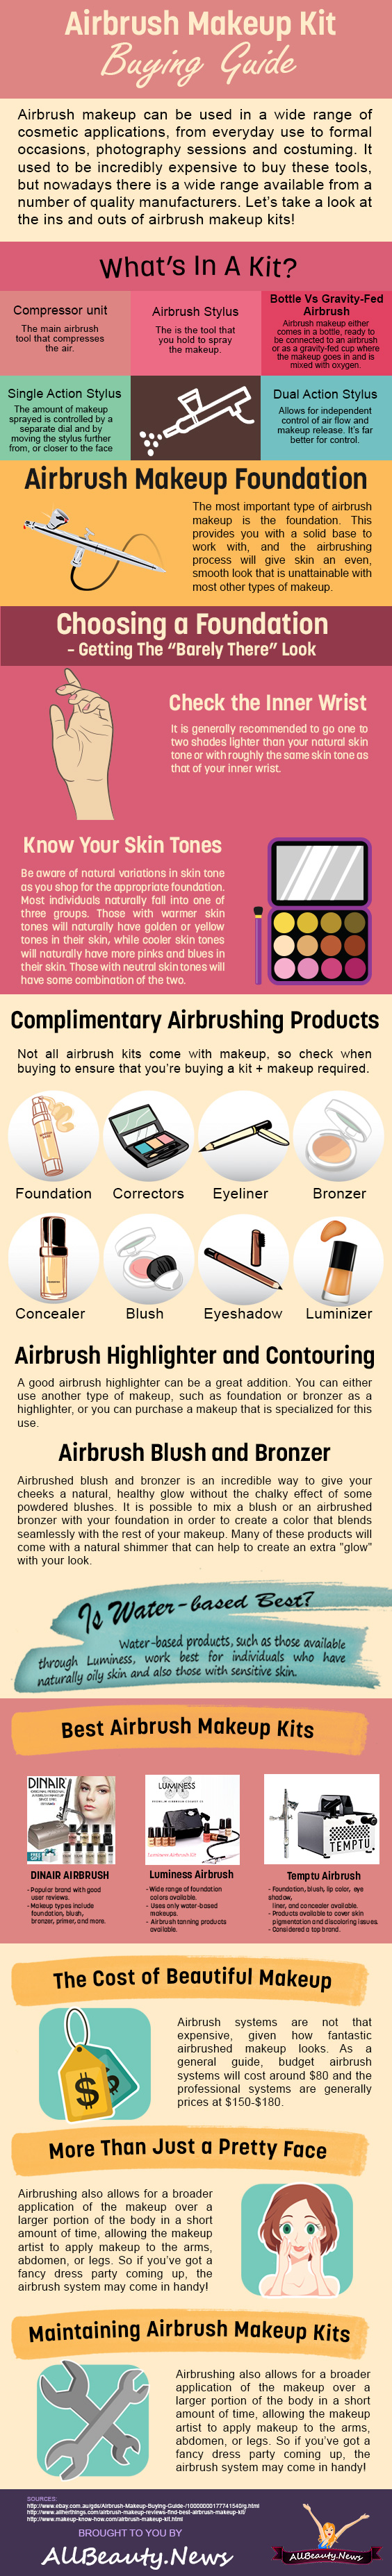 How To Find The Best Airbrush Makeup Kit